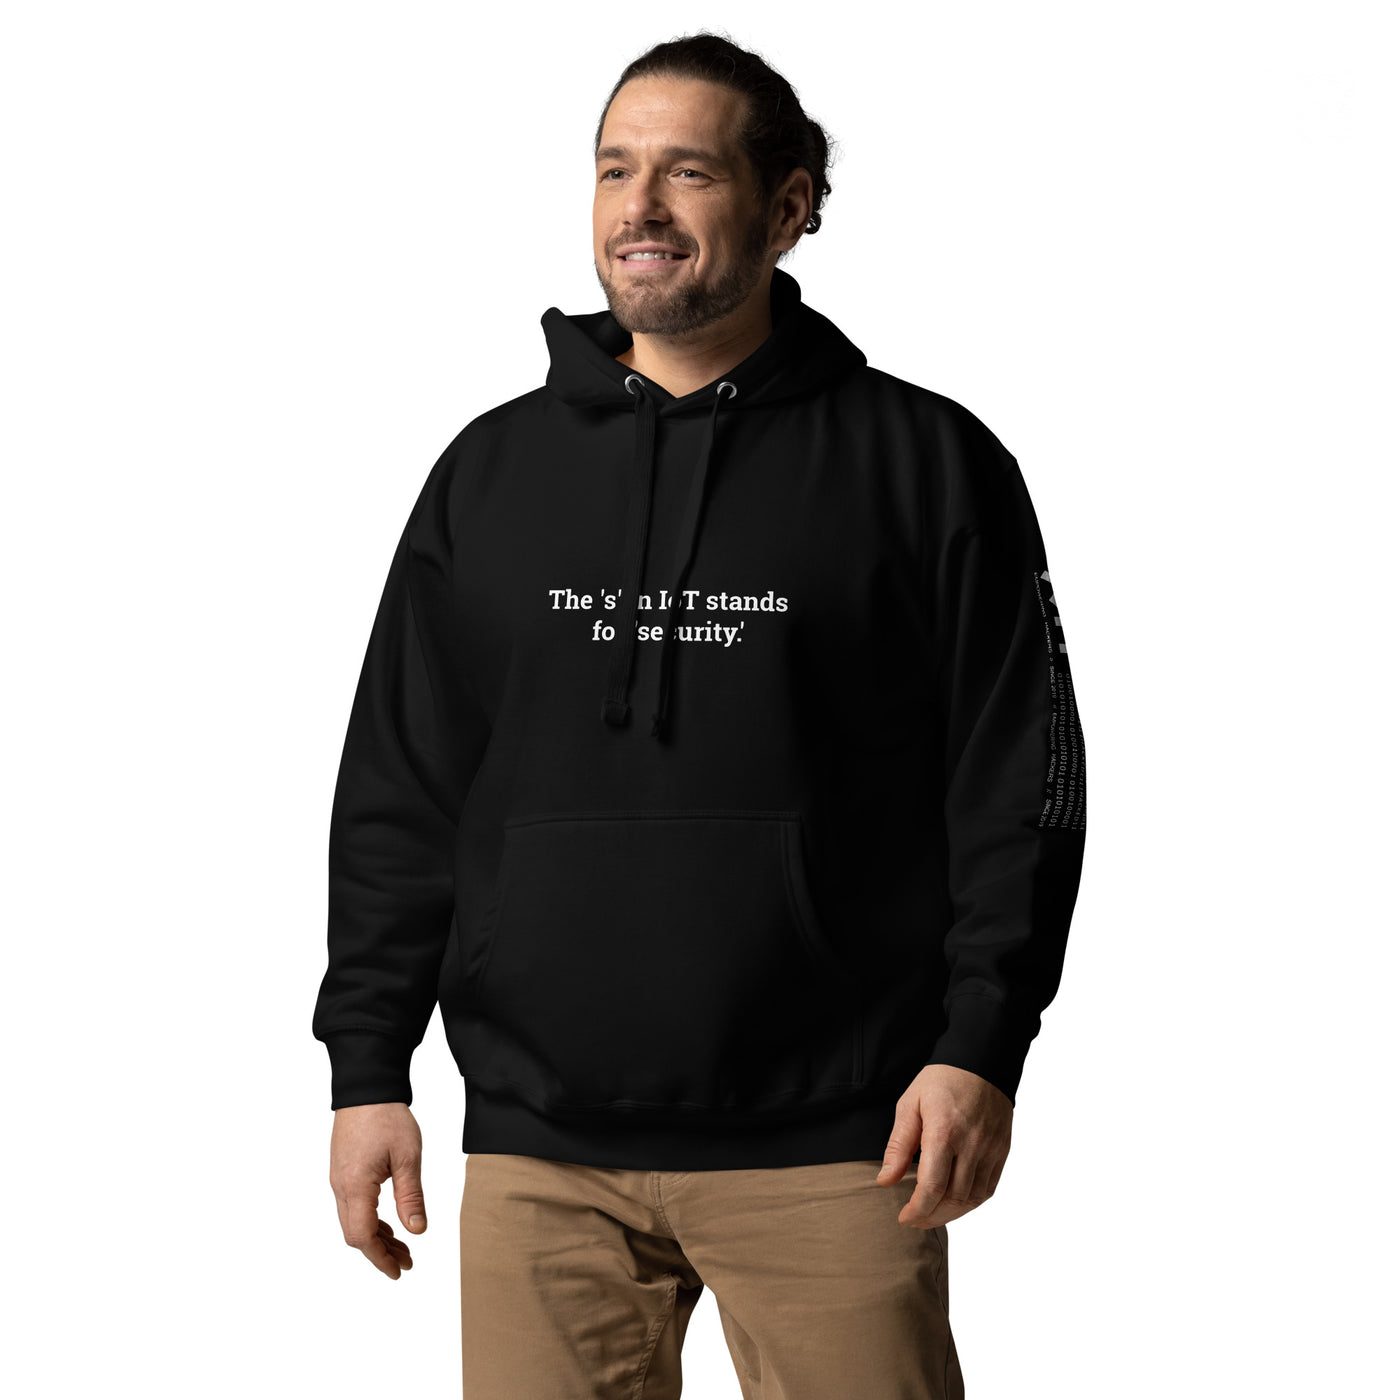 The "S" in IoT Stands for Security V1 - Unisex Hoodie